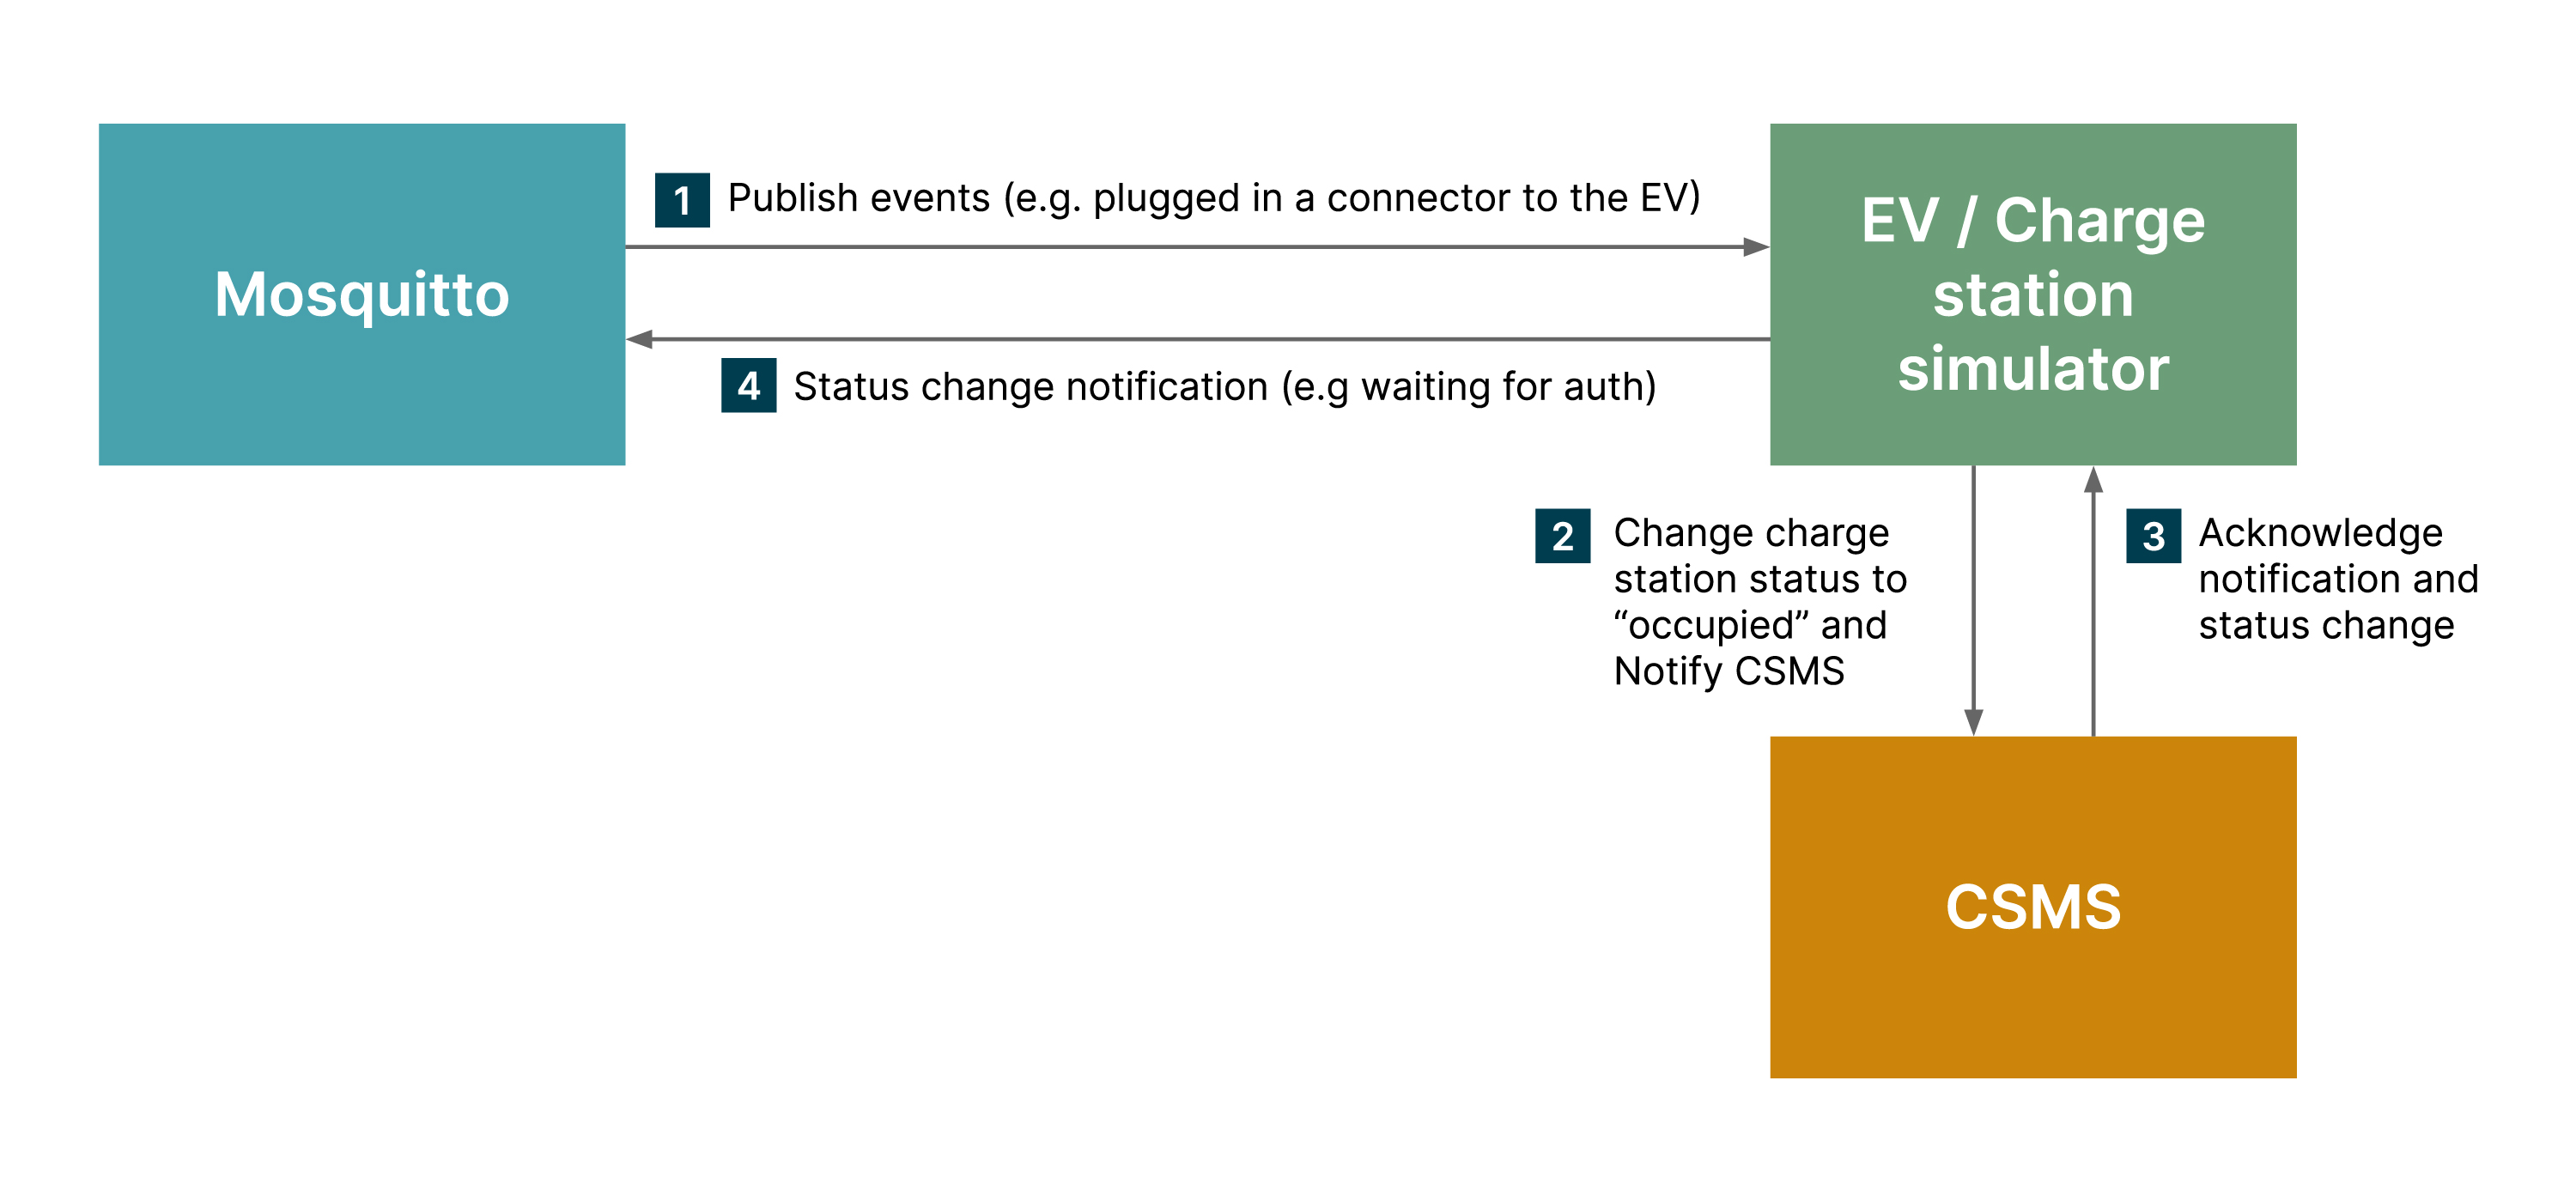 A MQTT message for publishing events (e.g. plug in a connector to the EV) and receiving status change responses from the CSMS and EV/ charge station simulator